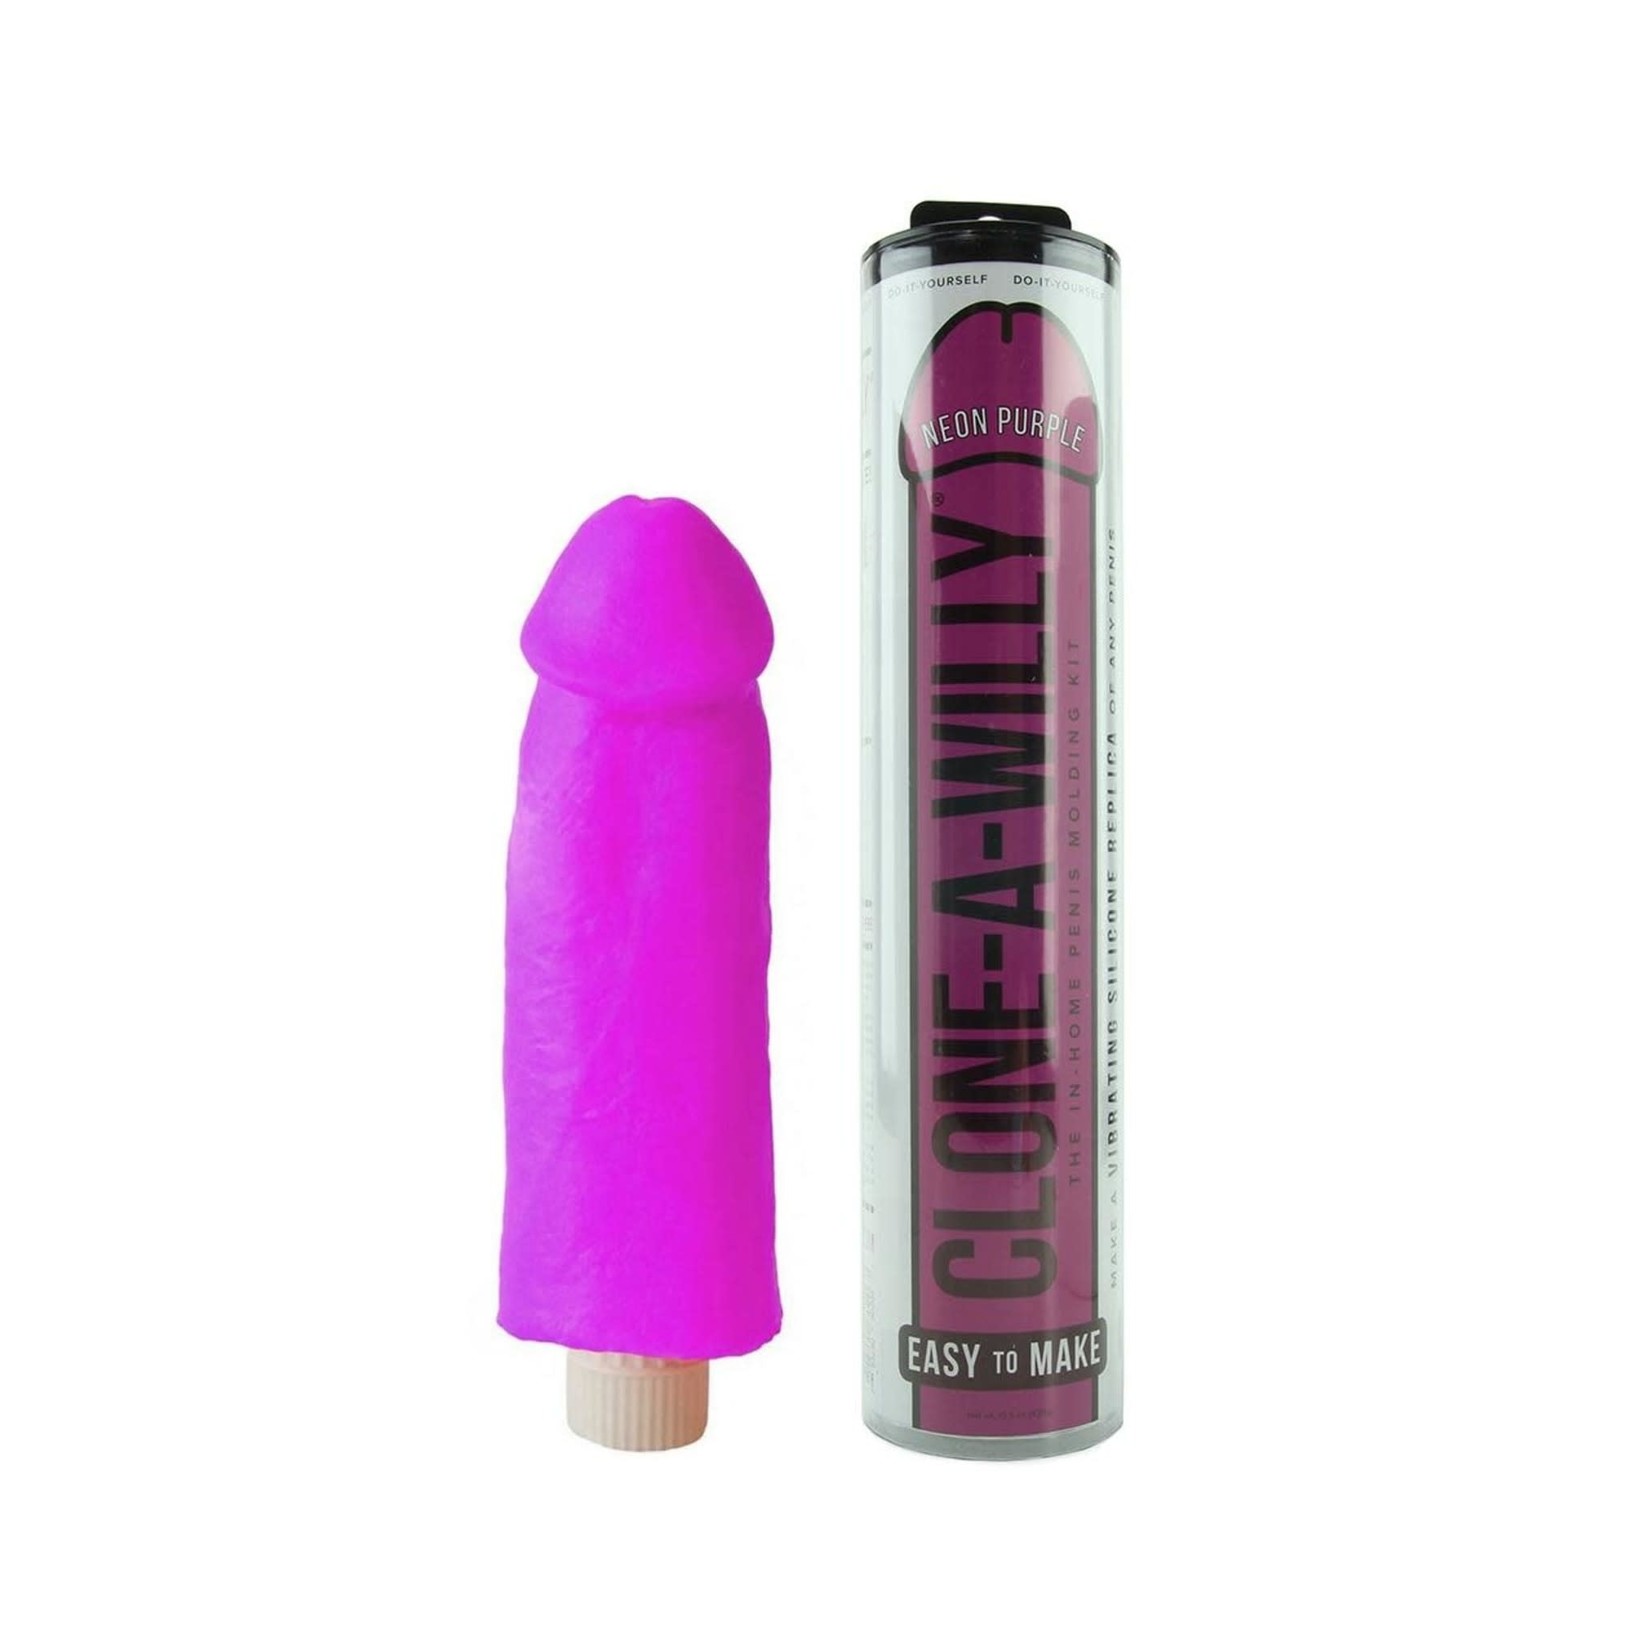 CLONE A WILLY (EMPIRE LABS) CLONE-A-WILLY VIBRATOR KIT - NEON PURPLE